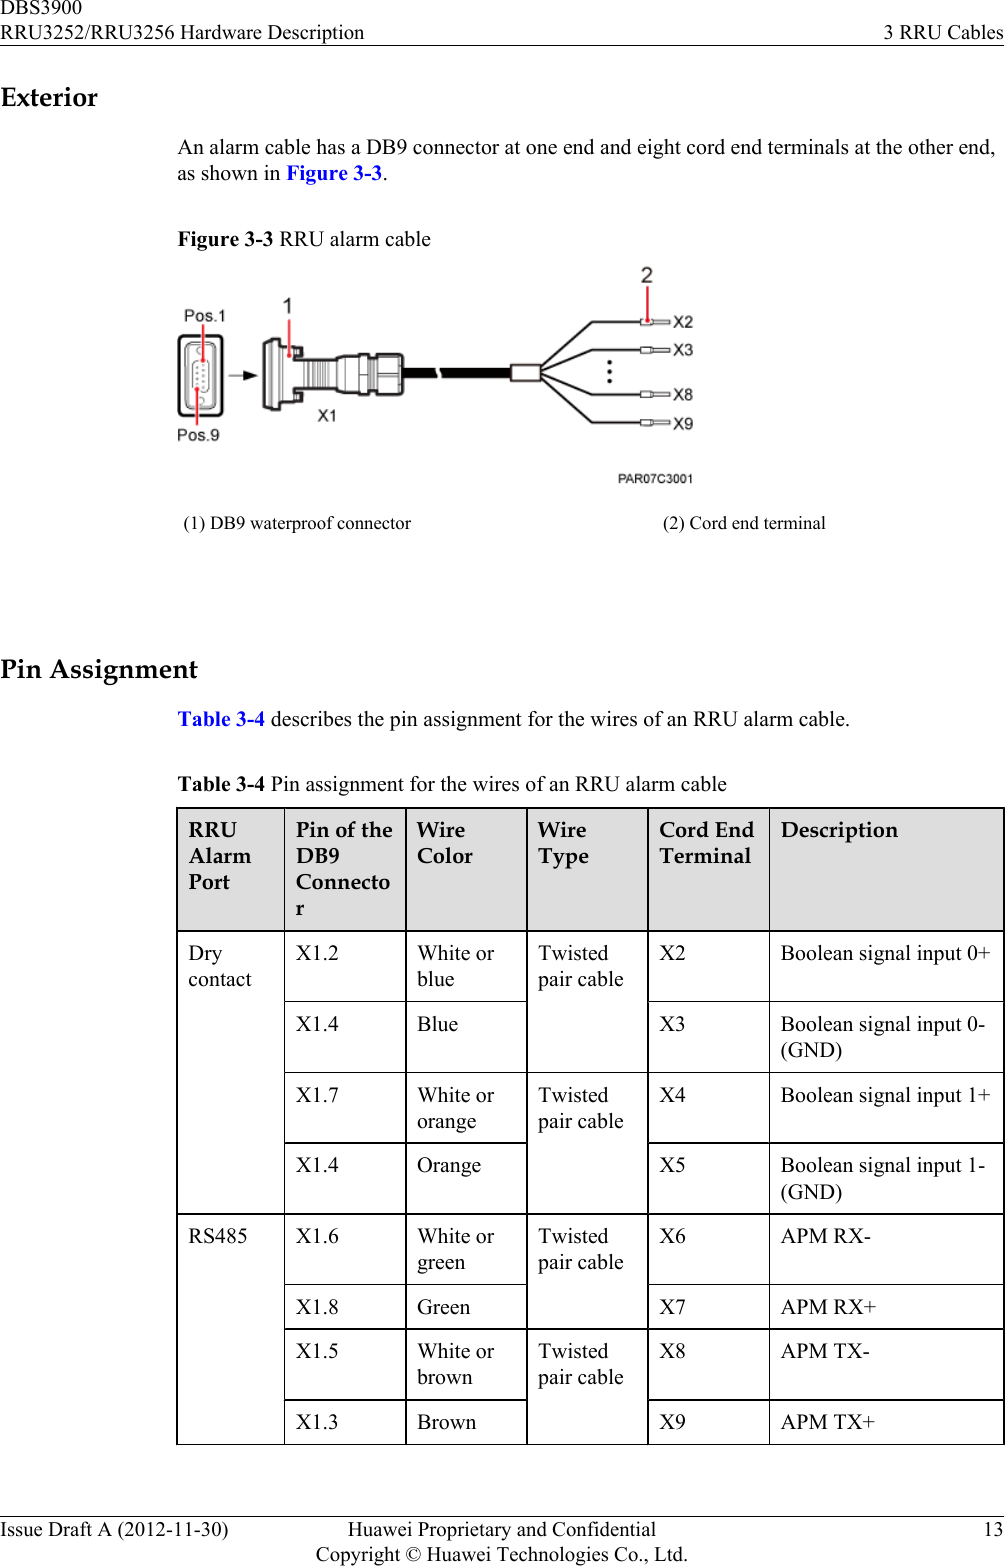 ExteriorAn alarm cable has a DB9 connector at one end and eight cord end terminals at the other end,as shown in Figure 3-3.Figure 3-3 RRU alarm cable(1) DB9 waterproof connector (2) Cord end terminal Pin AssignmentTable 3-4 describes the pin assignment for the wires of an RRU alarm cable.Table 3-4 Pin assignment for the wires of an RRU alarm cableRRUAlarmPortPin of theDB9ConnectorWireColorWireTypeCord EndTerminalDescriptionDrycontactX1.2 White orblueTwistedpair cableX2 Boolean signal input 0+X1.4 Blue X3 Boolean signal input 0-(GND)X1.7 White ororangeTwistedpair cableX4 Boolean signal input 1+X1.4 Orange X5 Boolean signal input 1-(GND)RS485 X1.6 White orgreenTwistedpair cableX6 APM RX-X1.8 Green X7 APM RX+X1.5 White orbrownTwistedpair cableX8 APM TX-X1.3 Brown X9 APM TX+ DBS3900RRU3252/RRU3256 Hardware Description 3 RRU CablesIssue Draft A (2012-11-30) Huawei Proprietary and ConfidentialCopyright © Huawei Technologies Co., Ltd.13